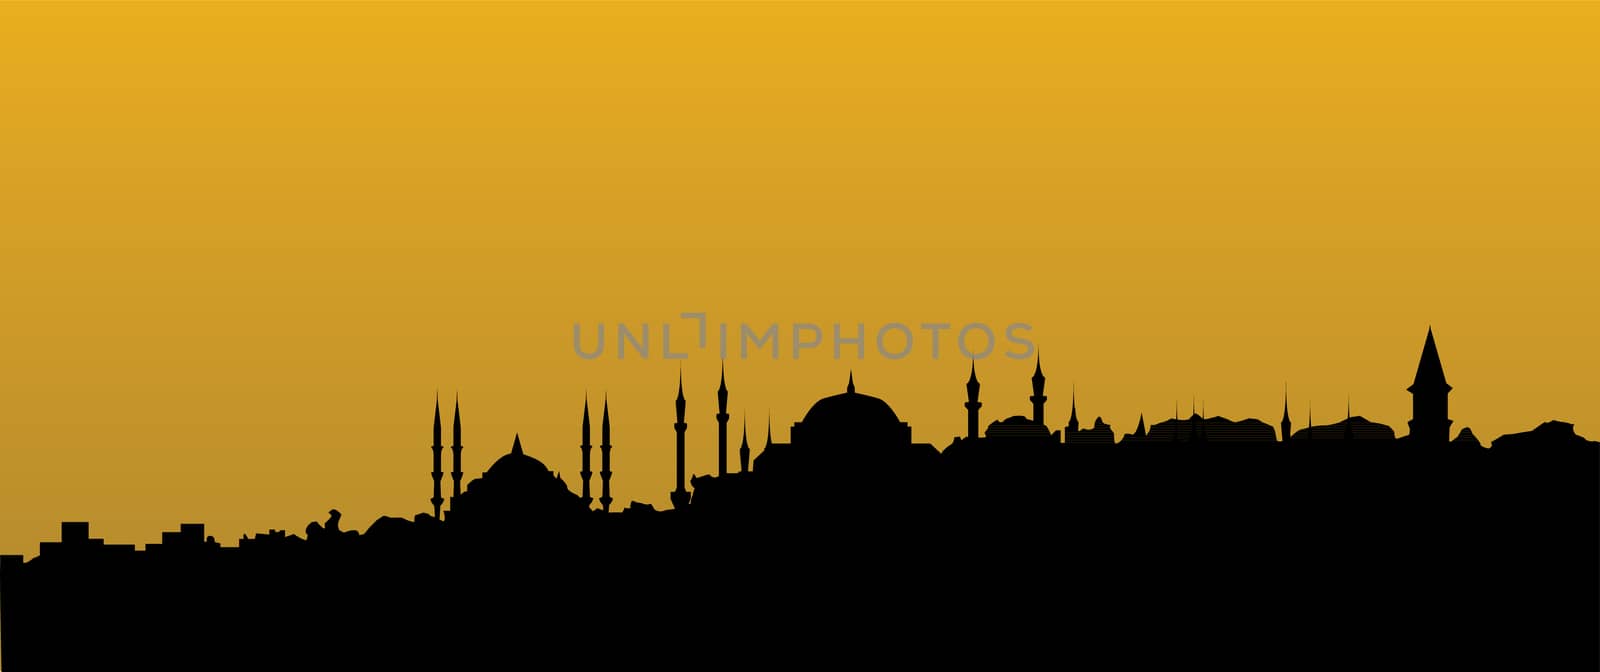 Istanbul skyline by compuinfoto